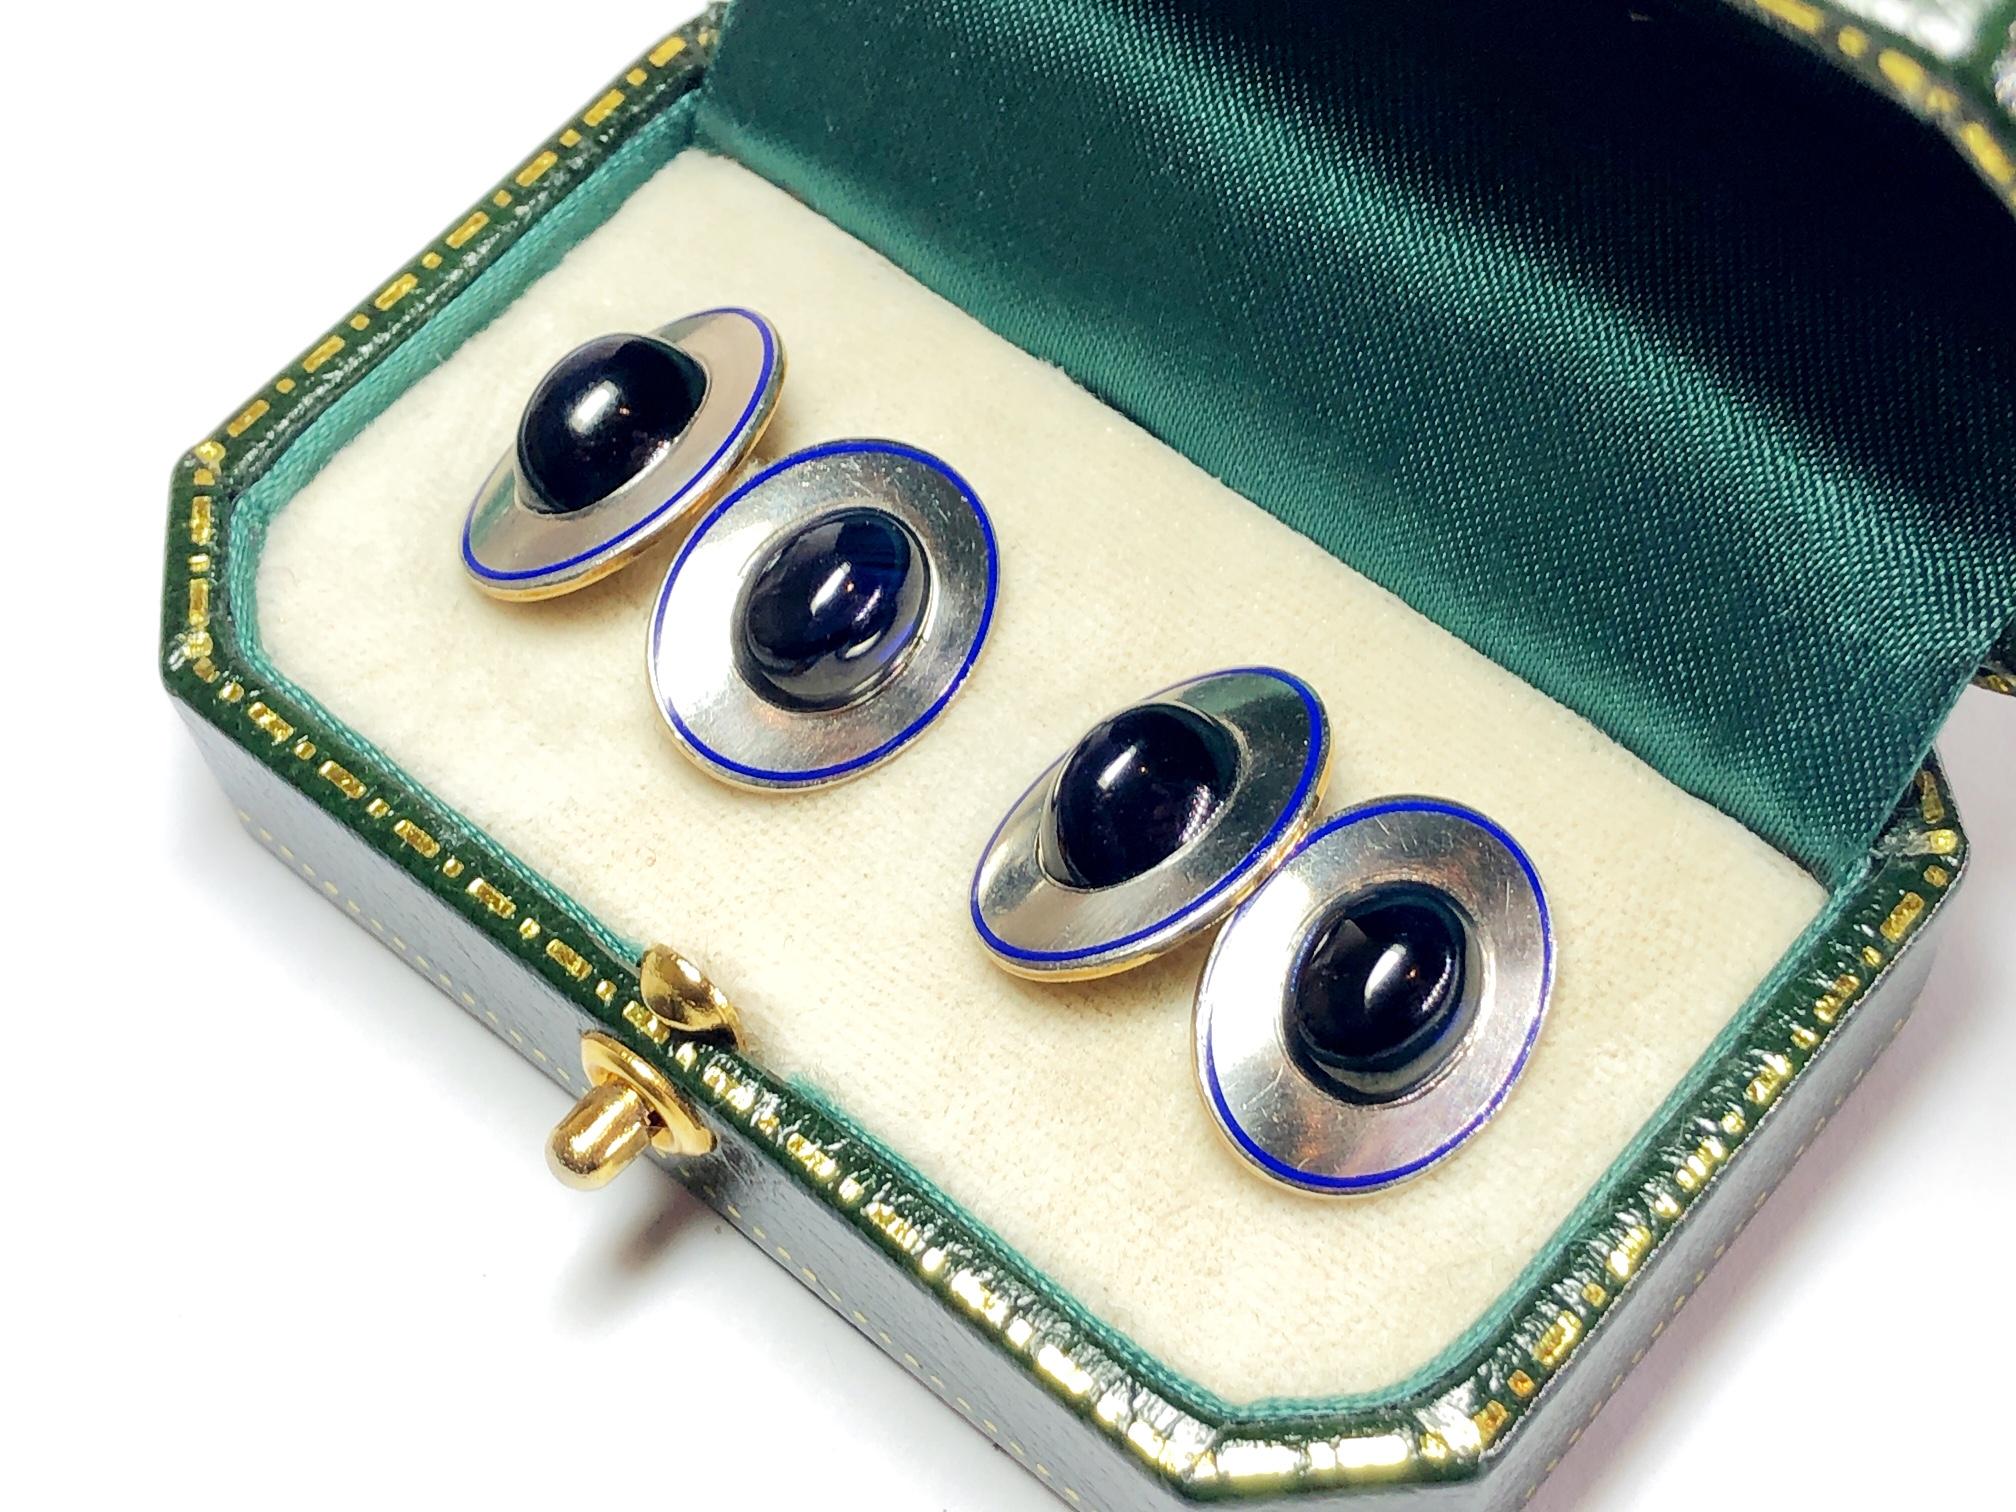 A pair of vintage oval cufflinks, set with a central oval cabochon-cut sapphire, with a blue enamel border, mounted in platinum on 14ct gold, stamped plat.&gold, with chain link fittings, circa 1970.